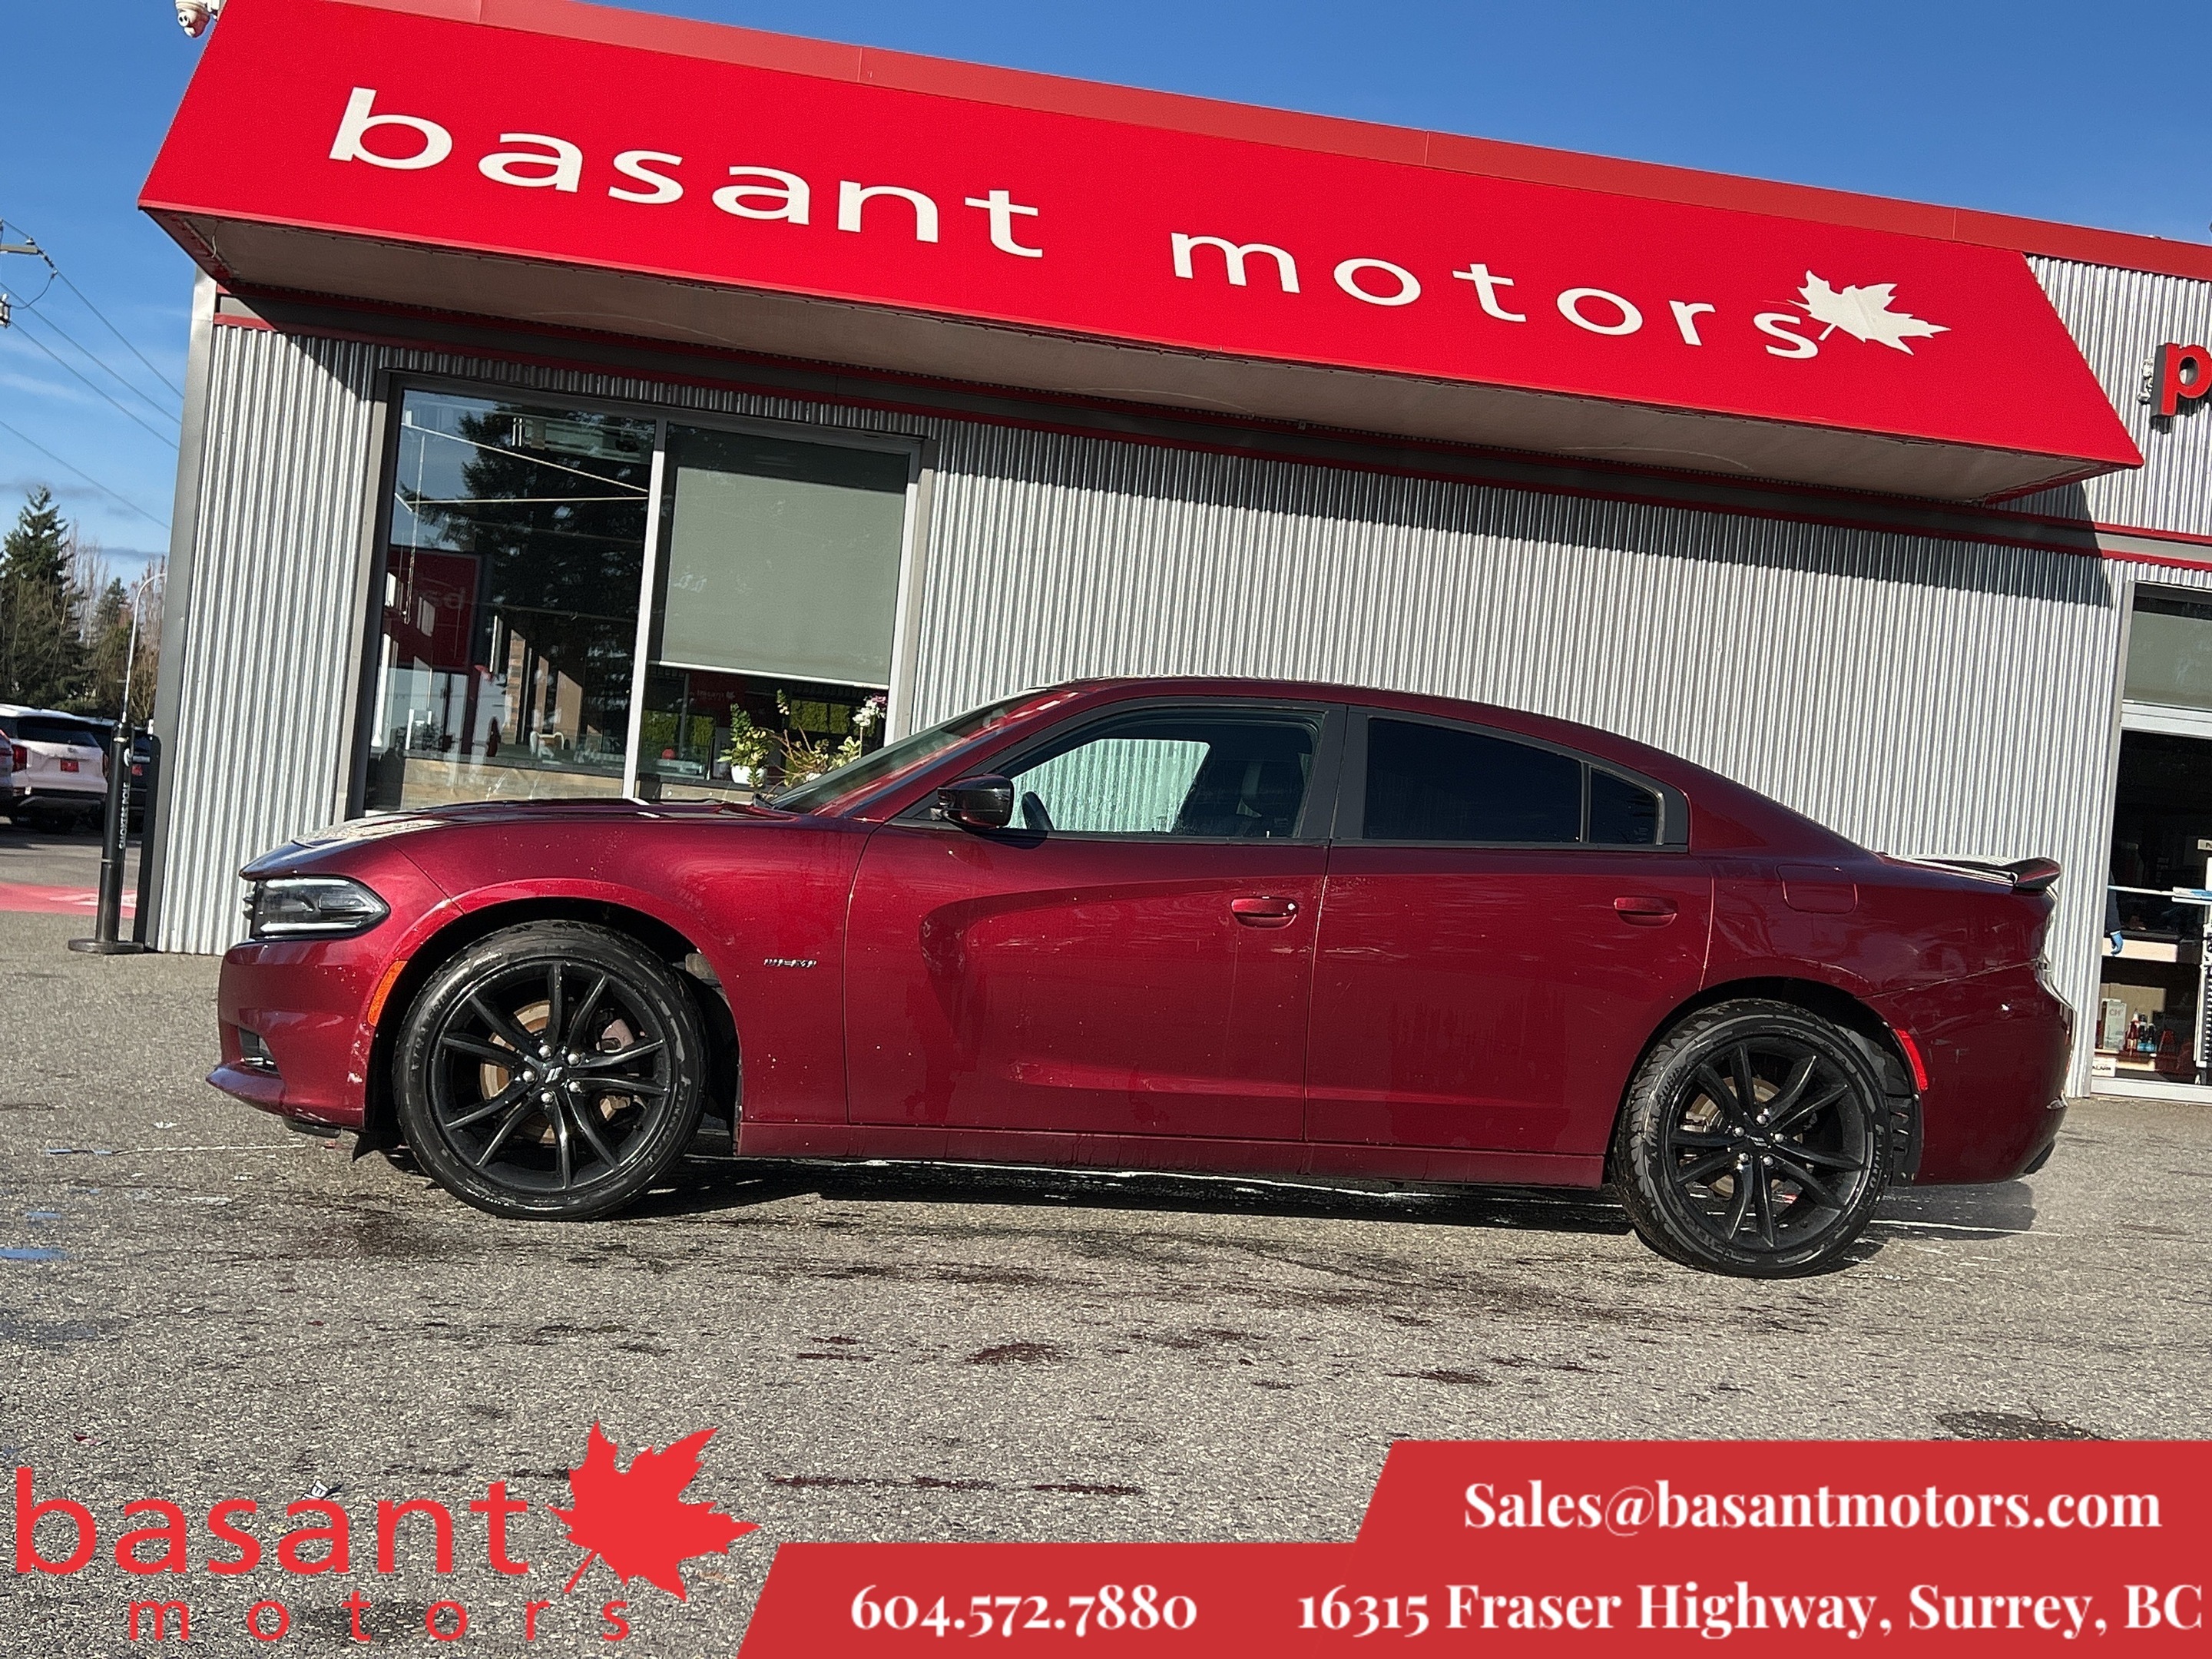 2017 Dodge Charger R/T, Hemi, Sunroof, Leather, Heated/Cooled Seats!